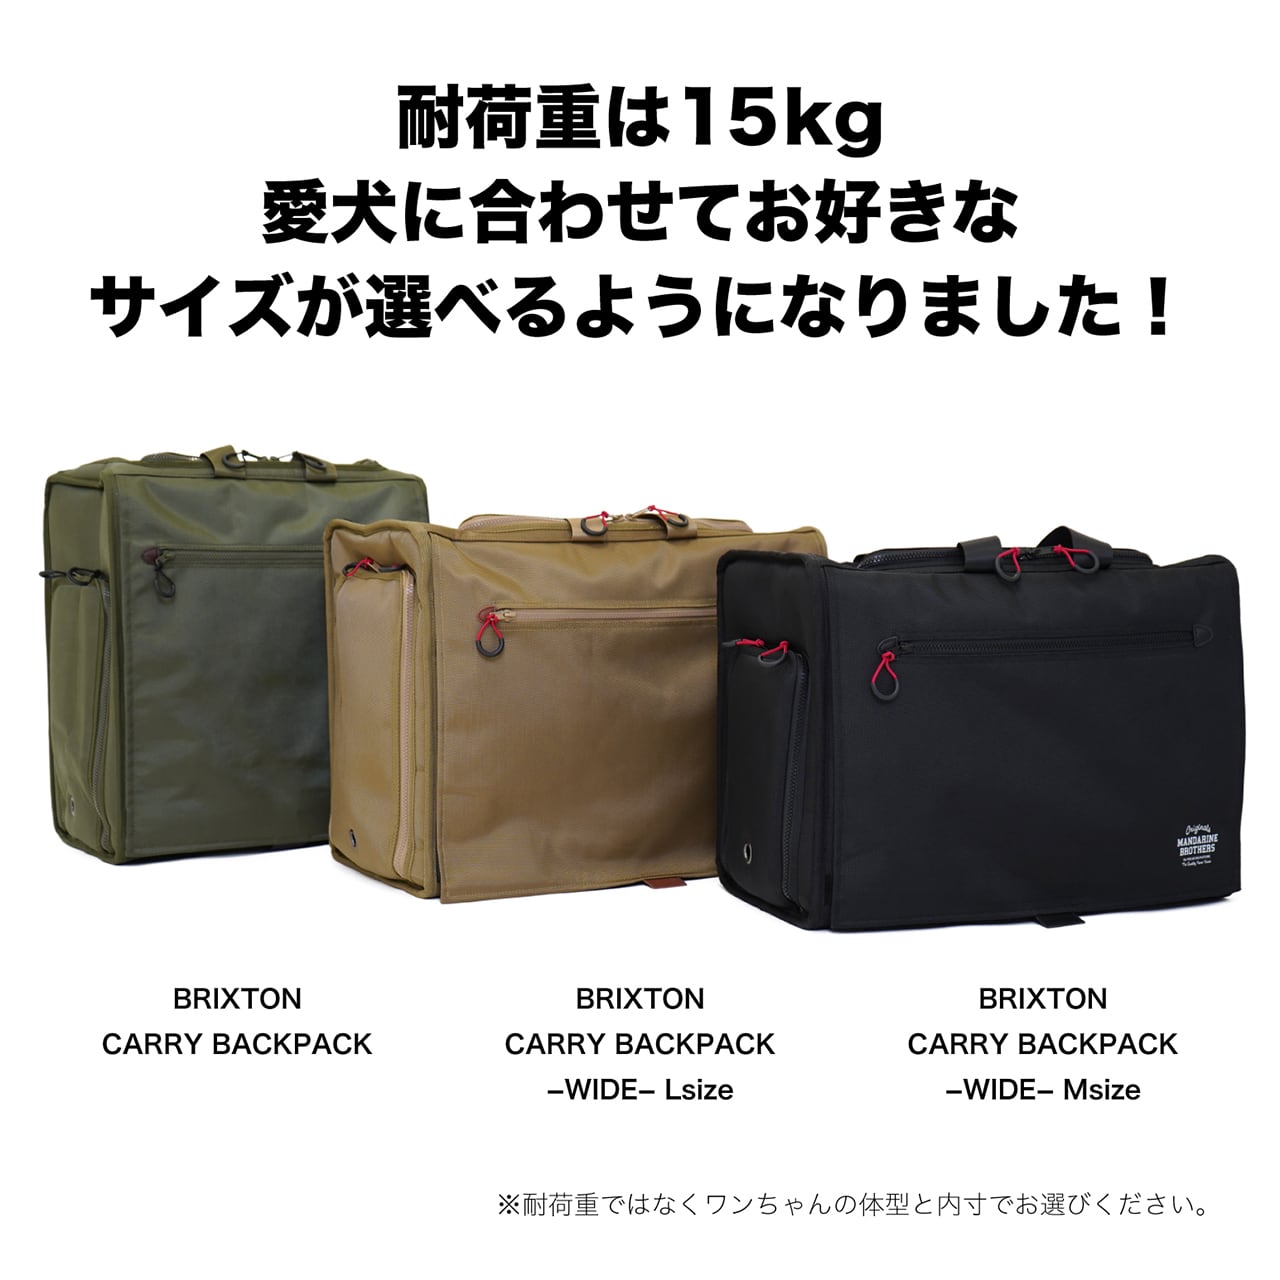 BRIXTON CARRY BACKPACK −WIDE− Mサイズ　ブラック